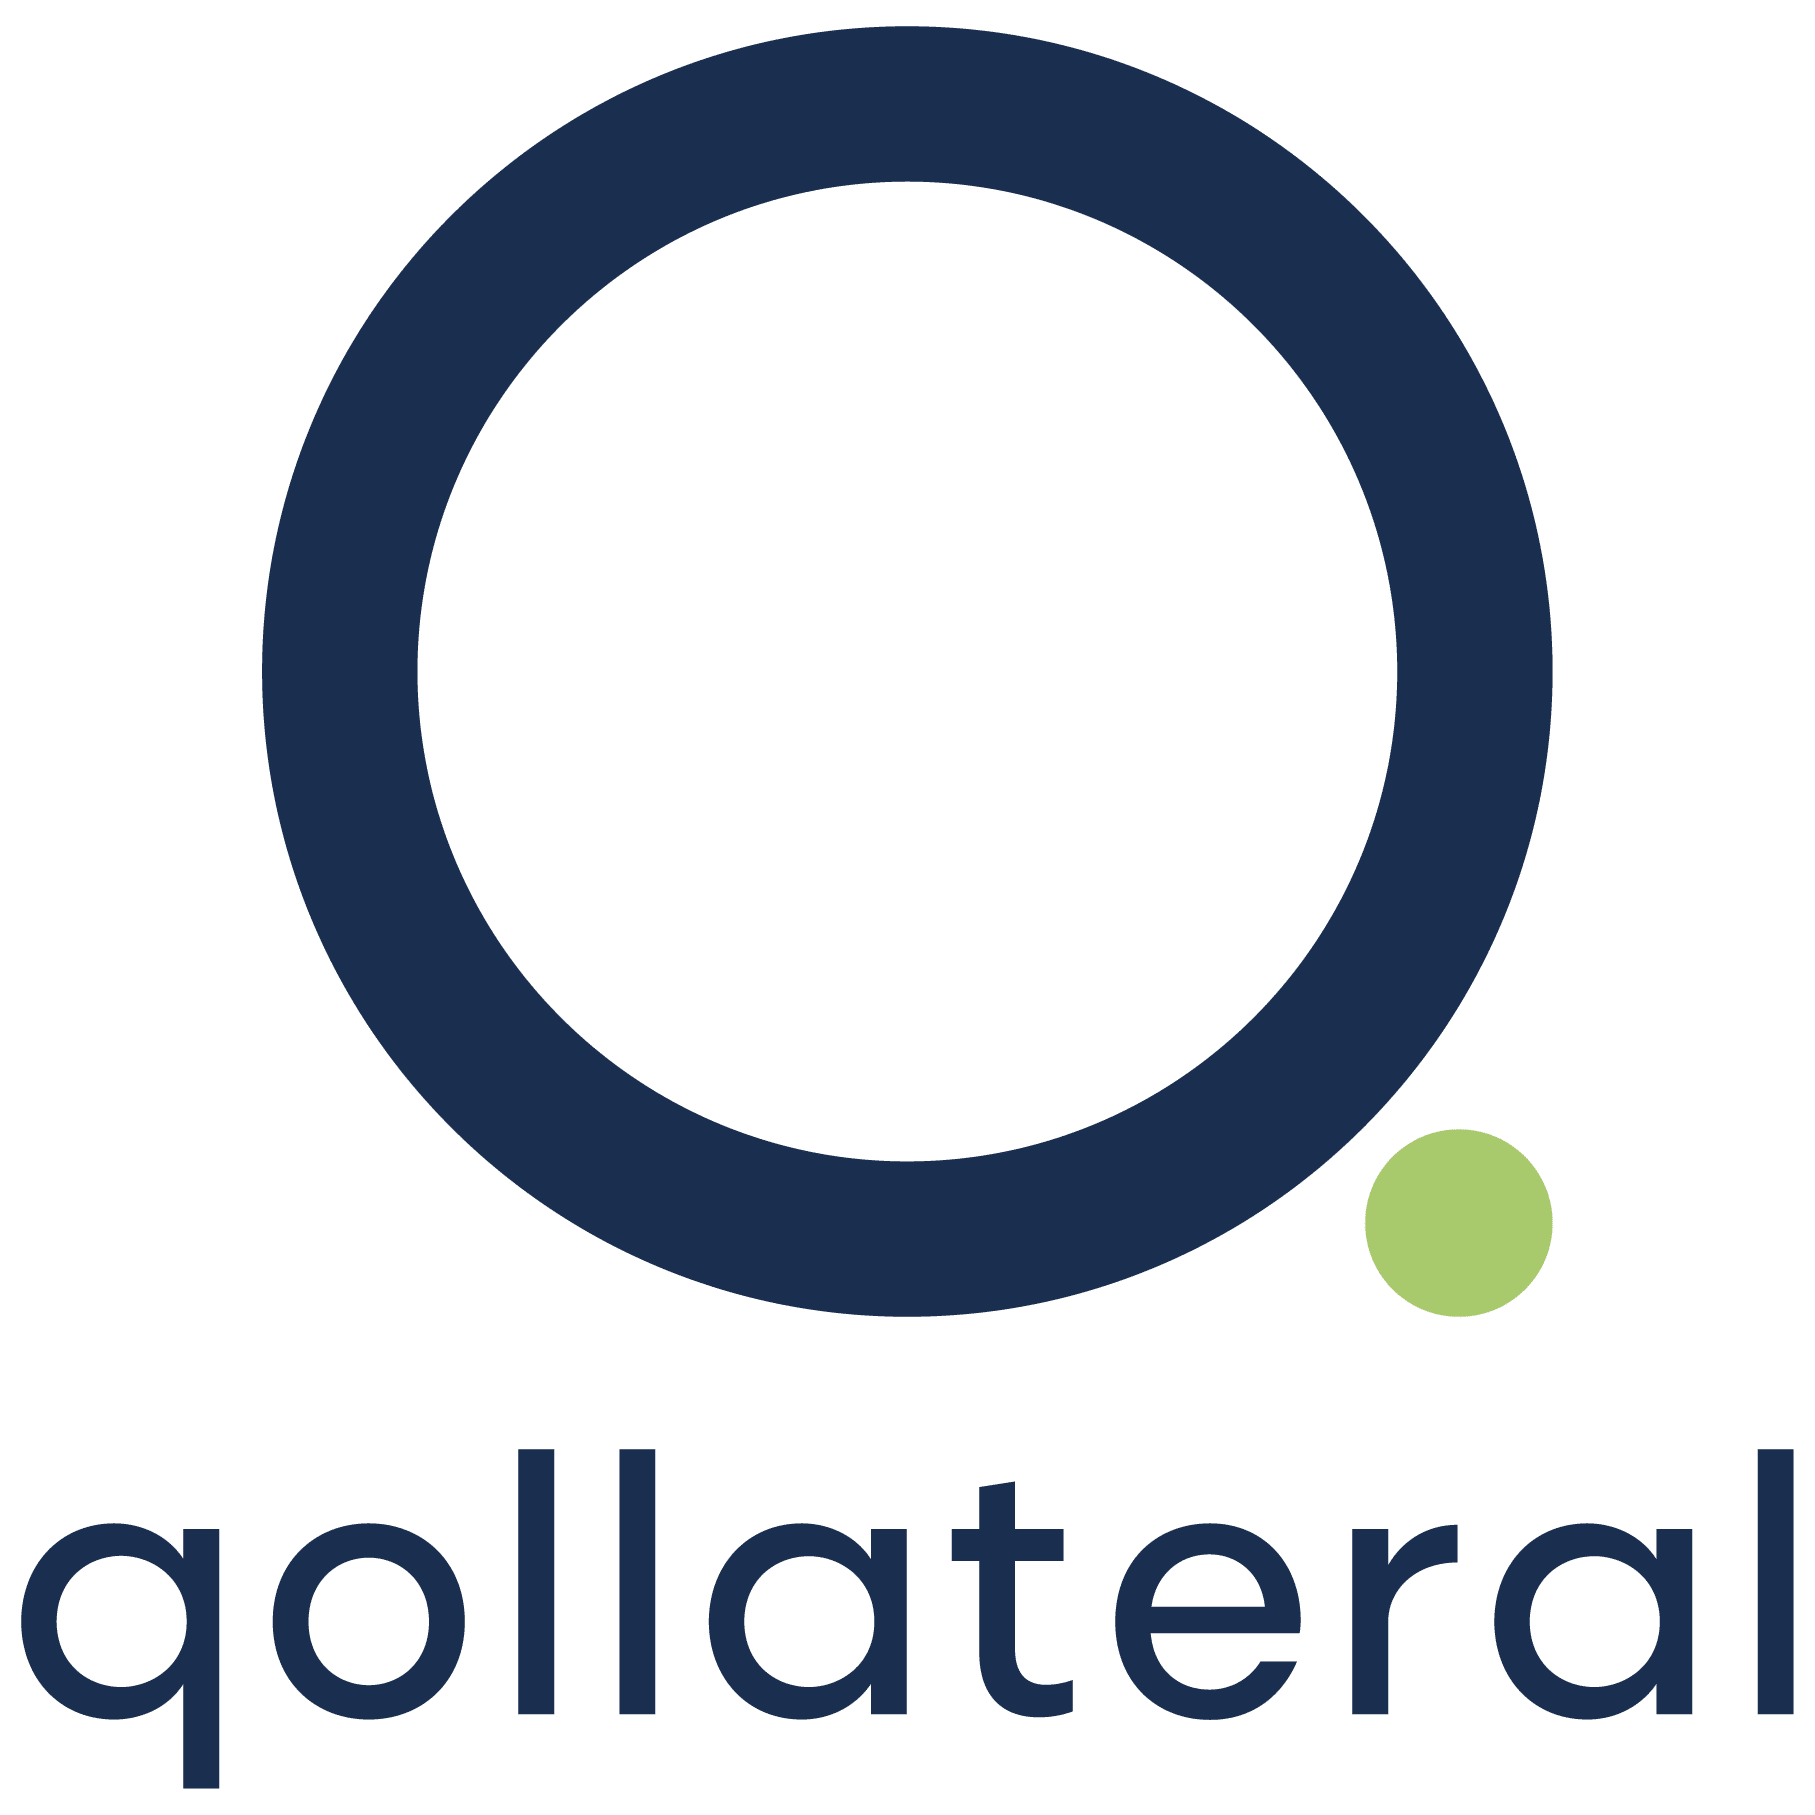 Qollateral_Primary Logo